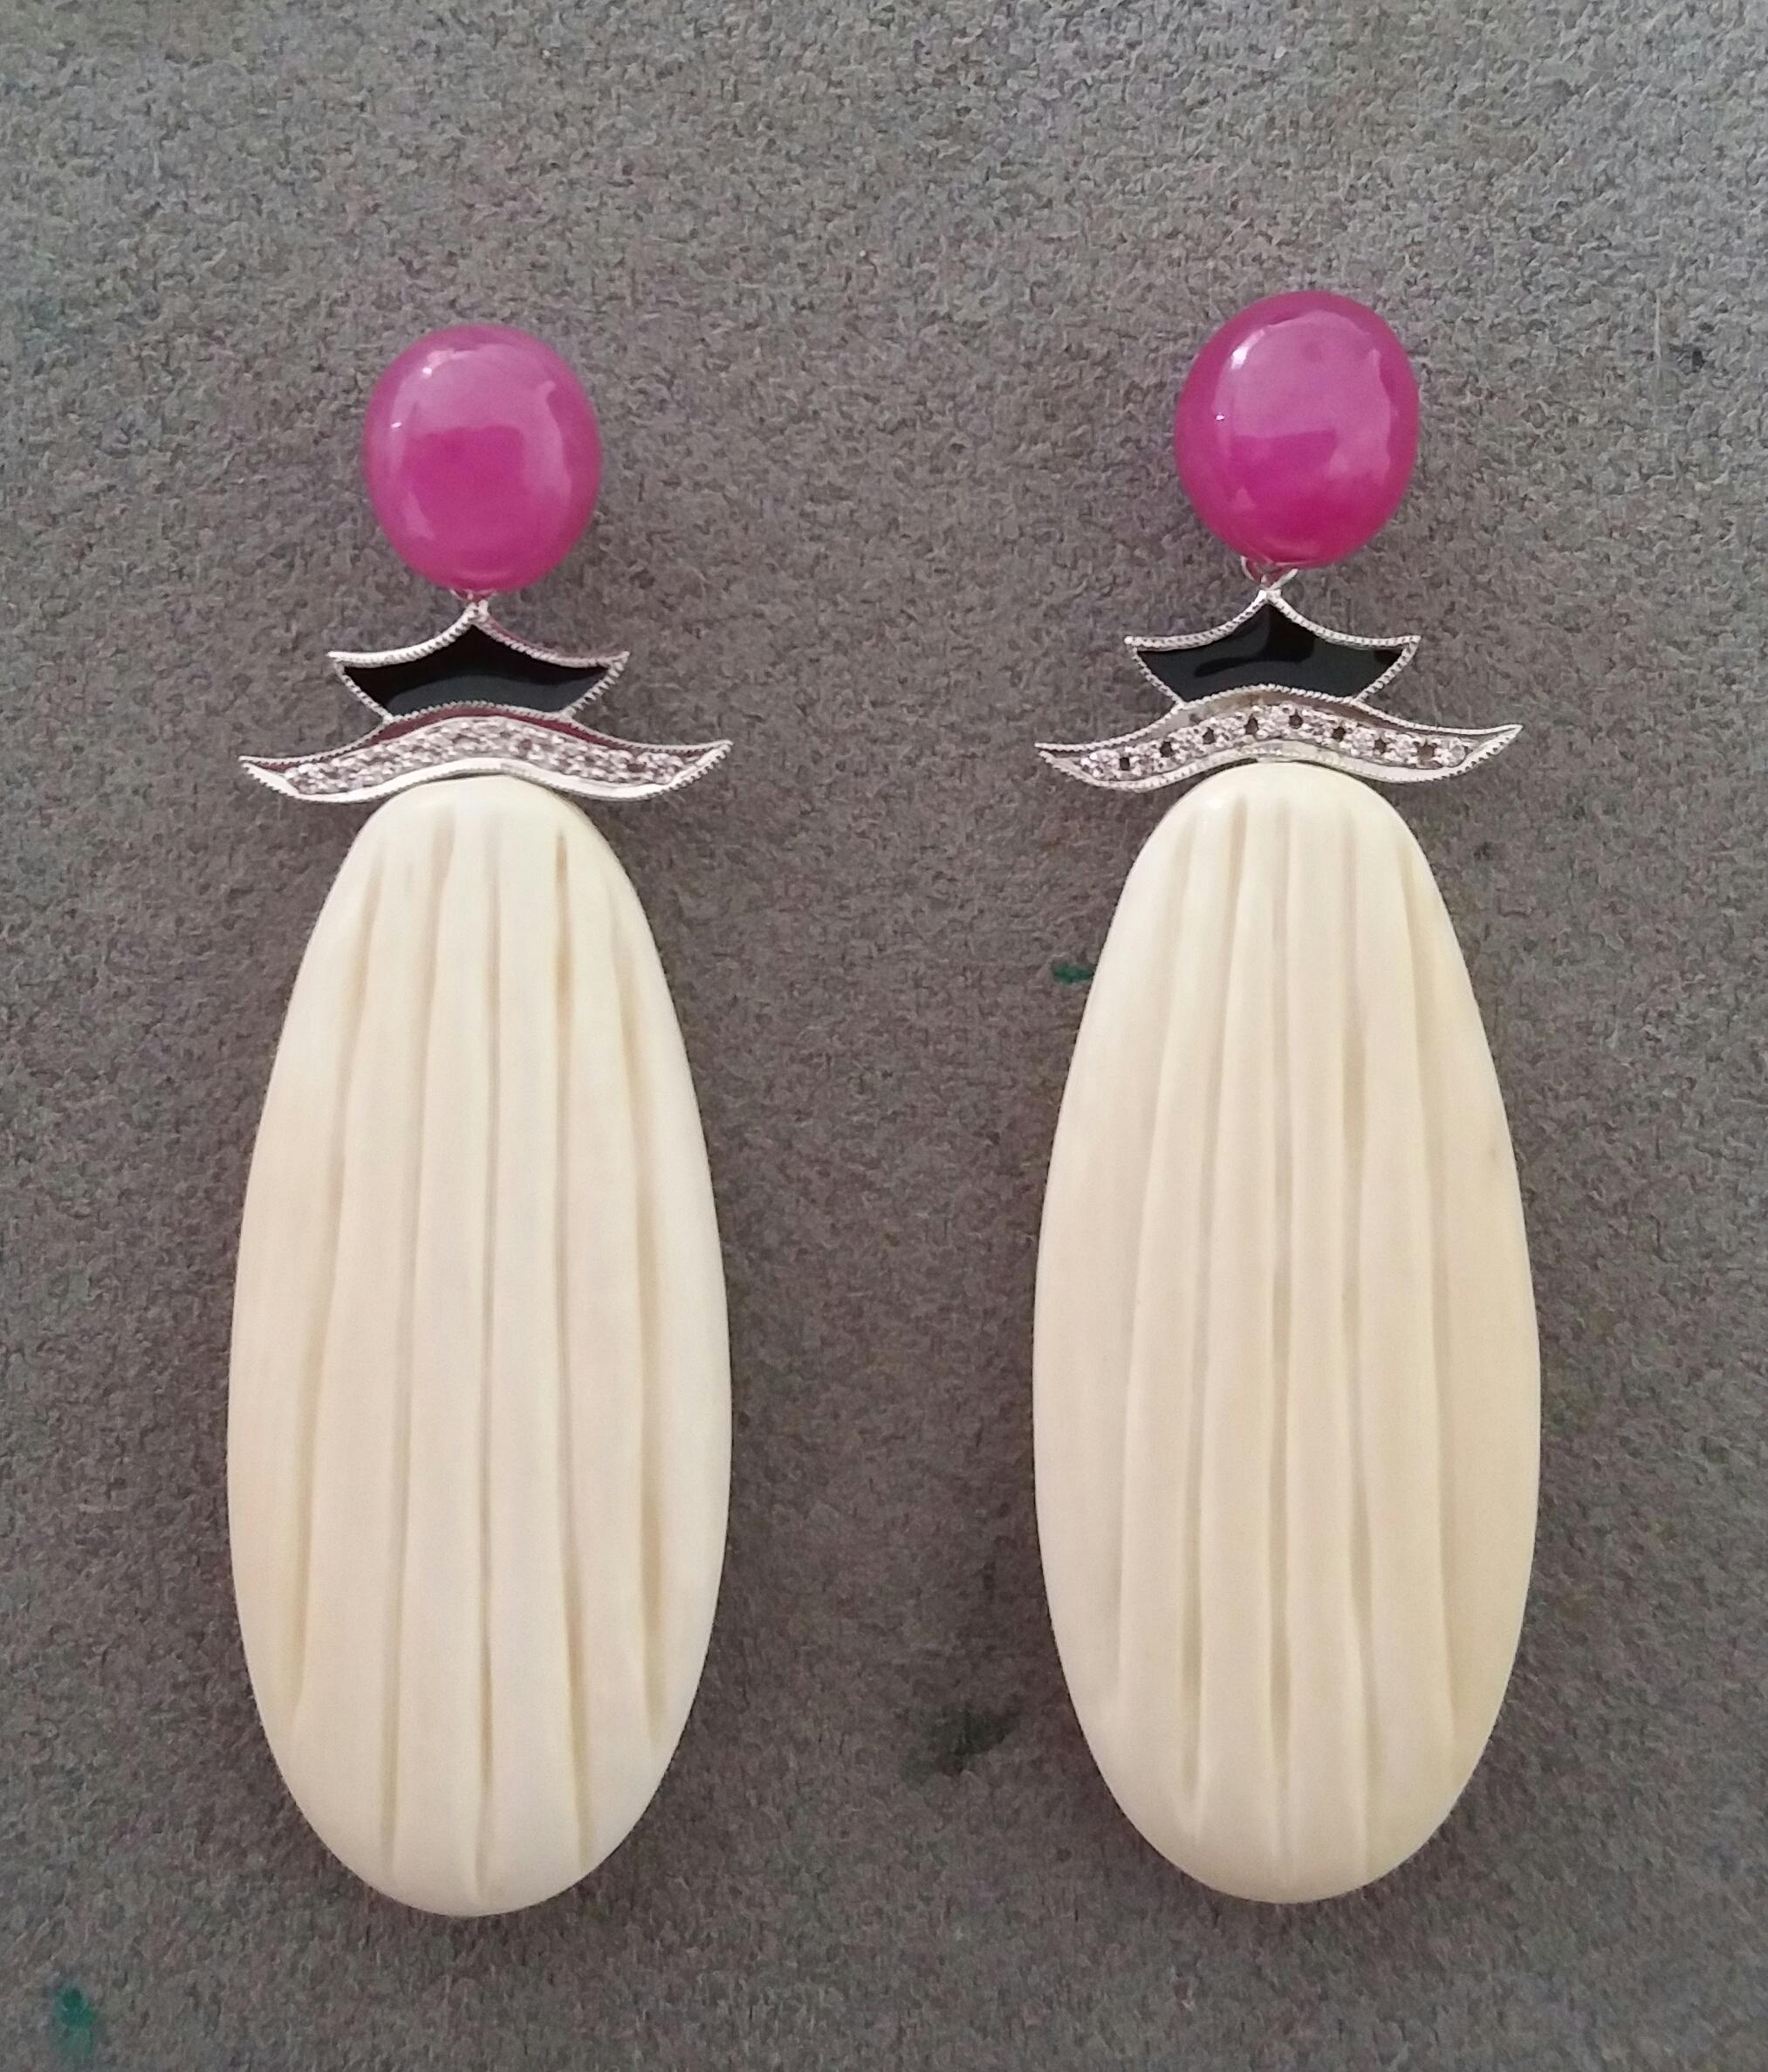 the top has 2 large ruby cabochons, then we have a central part in white gold diamonds and black enamel, finally the bottom part is composed of 2 Mammoth bone engraved flat drops

In 1978 our workshop started in Italy to make simple-chic Art Deco